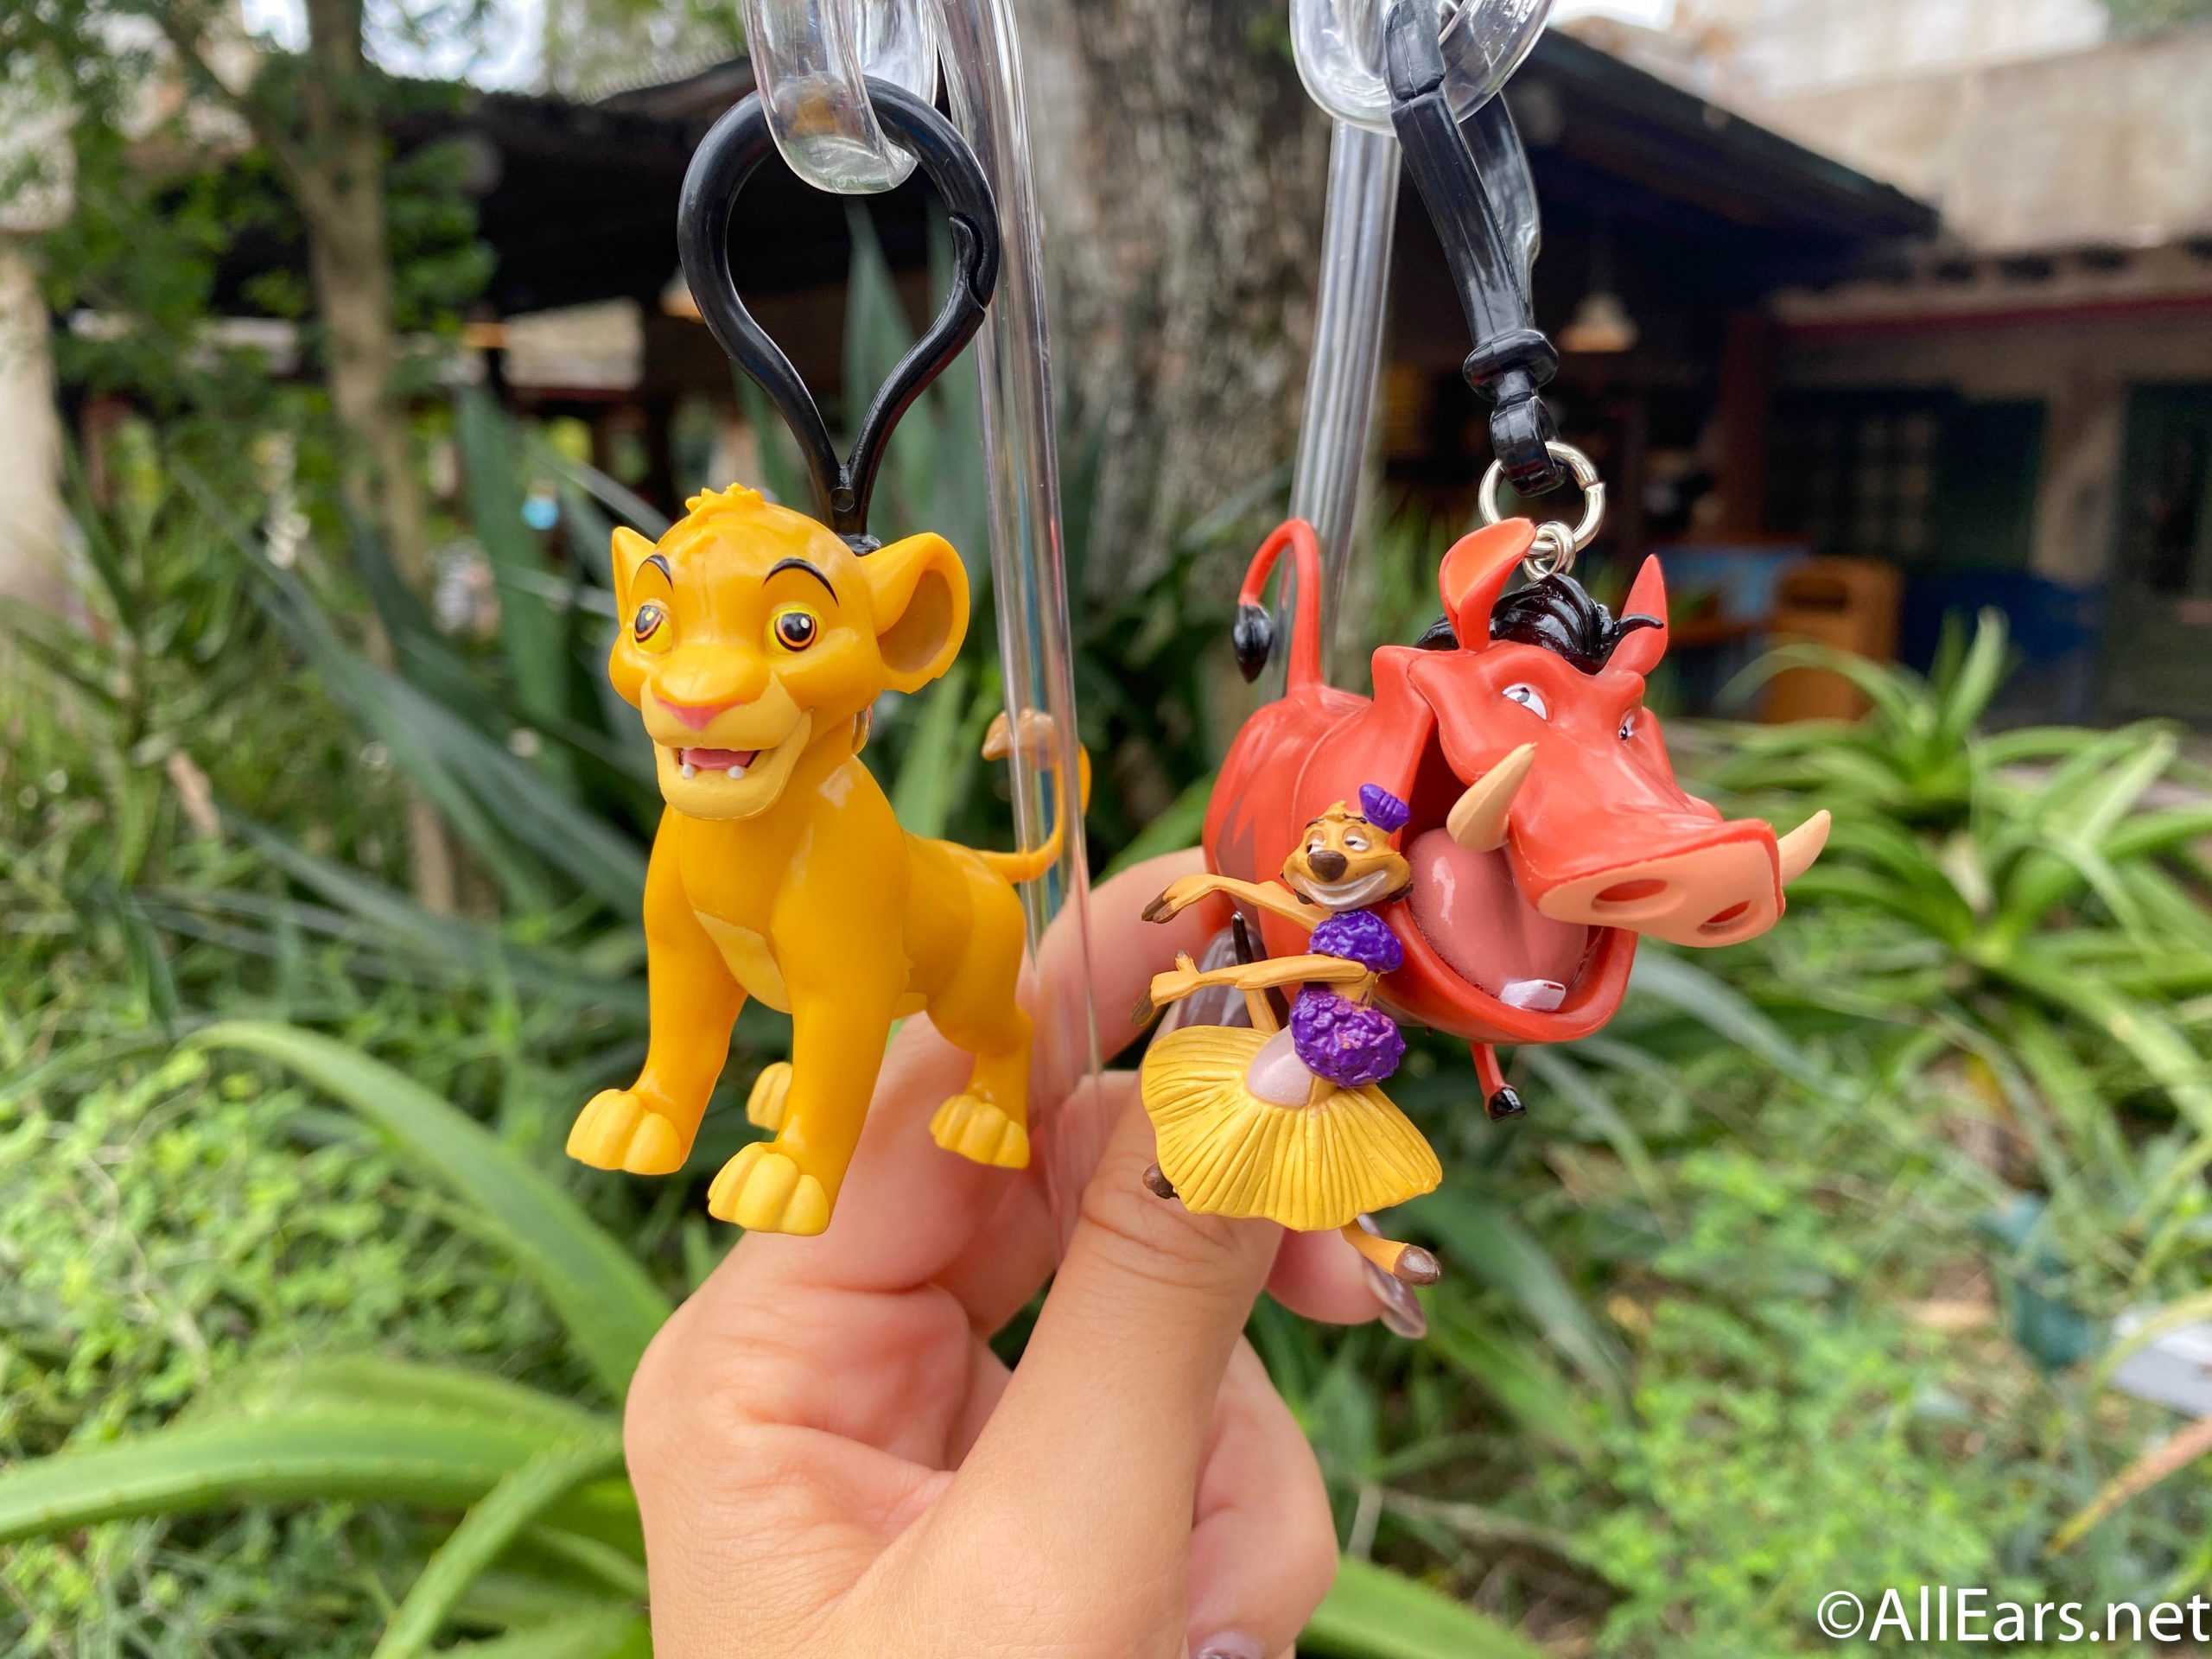 PHOTOS: Lion King Reusable Straws Are Now Available in Disney